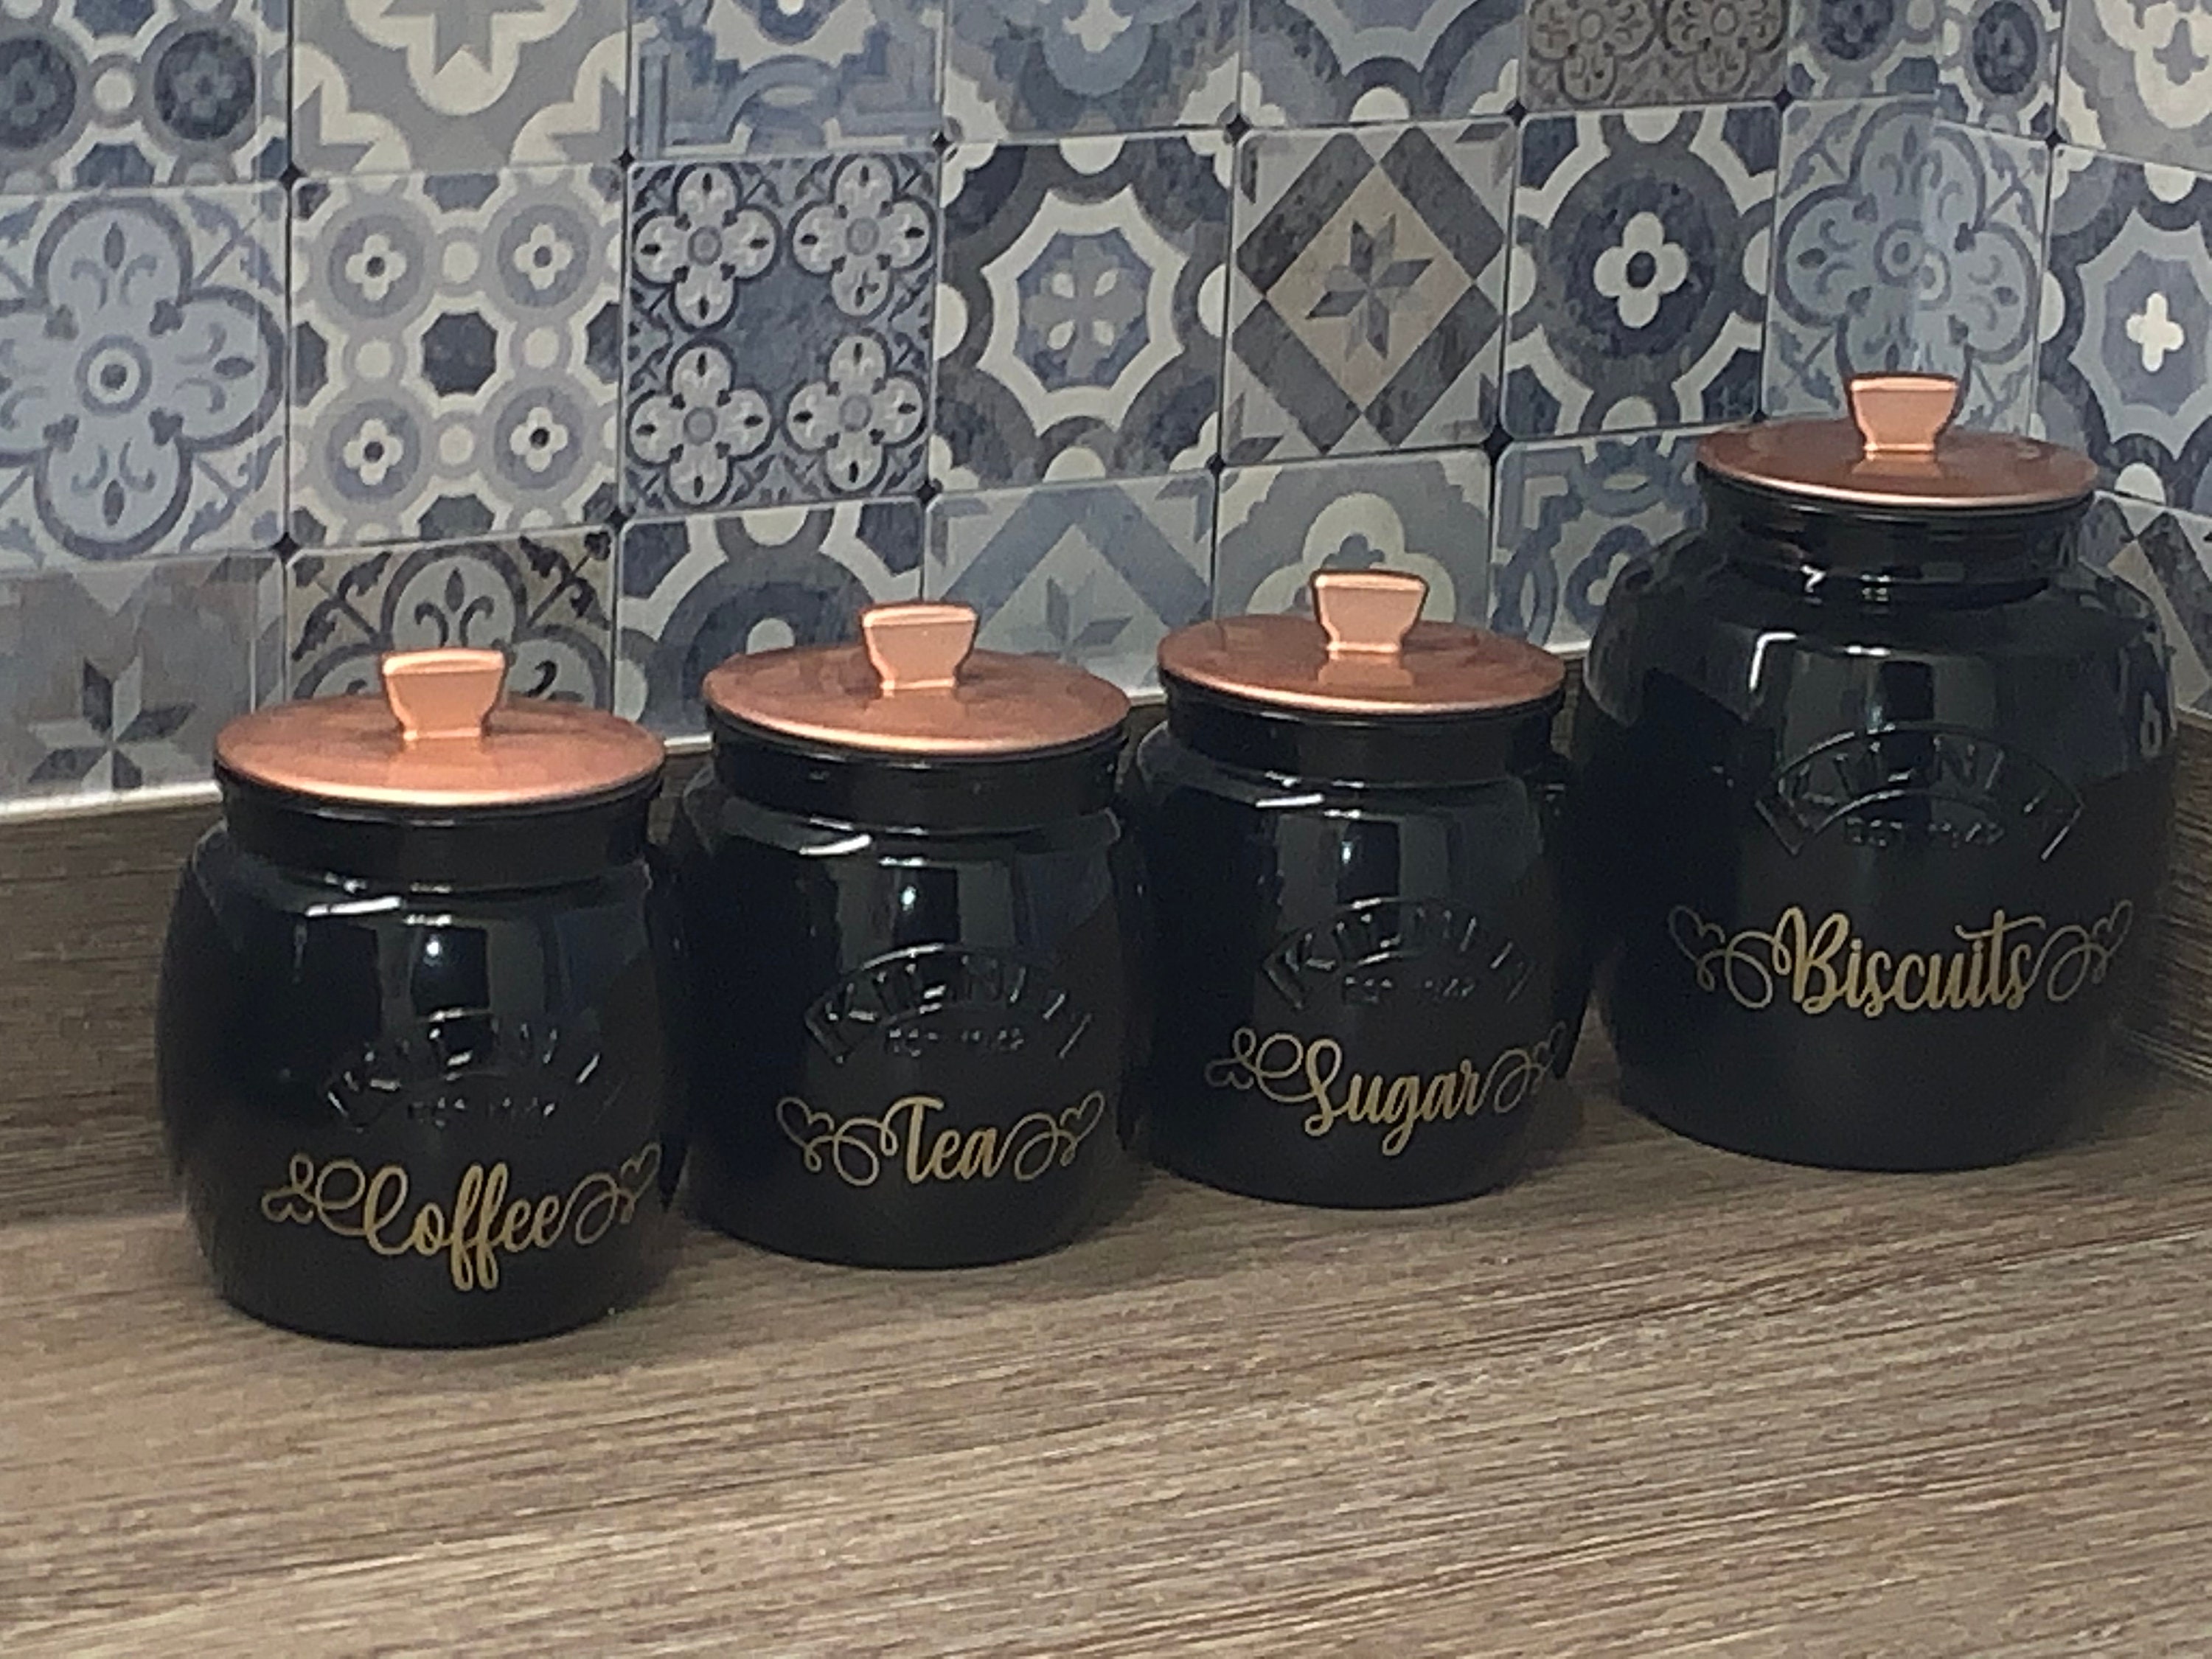 White and Copper Kitchen X 3 Tea Rose Gold 1 Ltr Coffee And Sugar Canisters